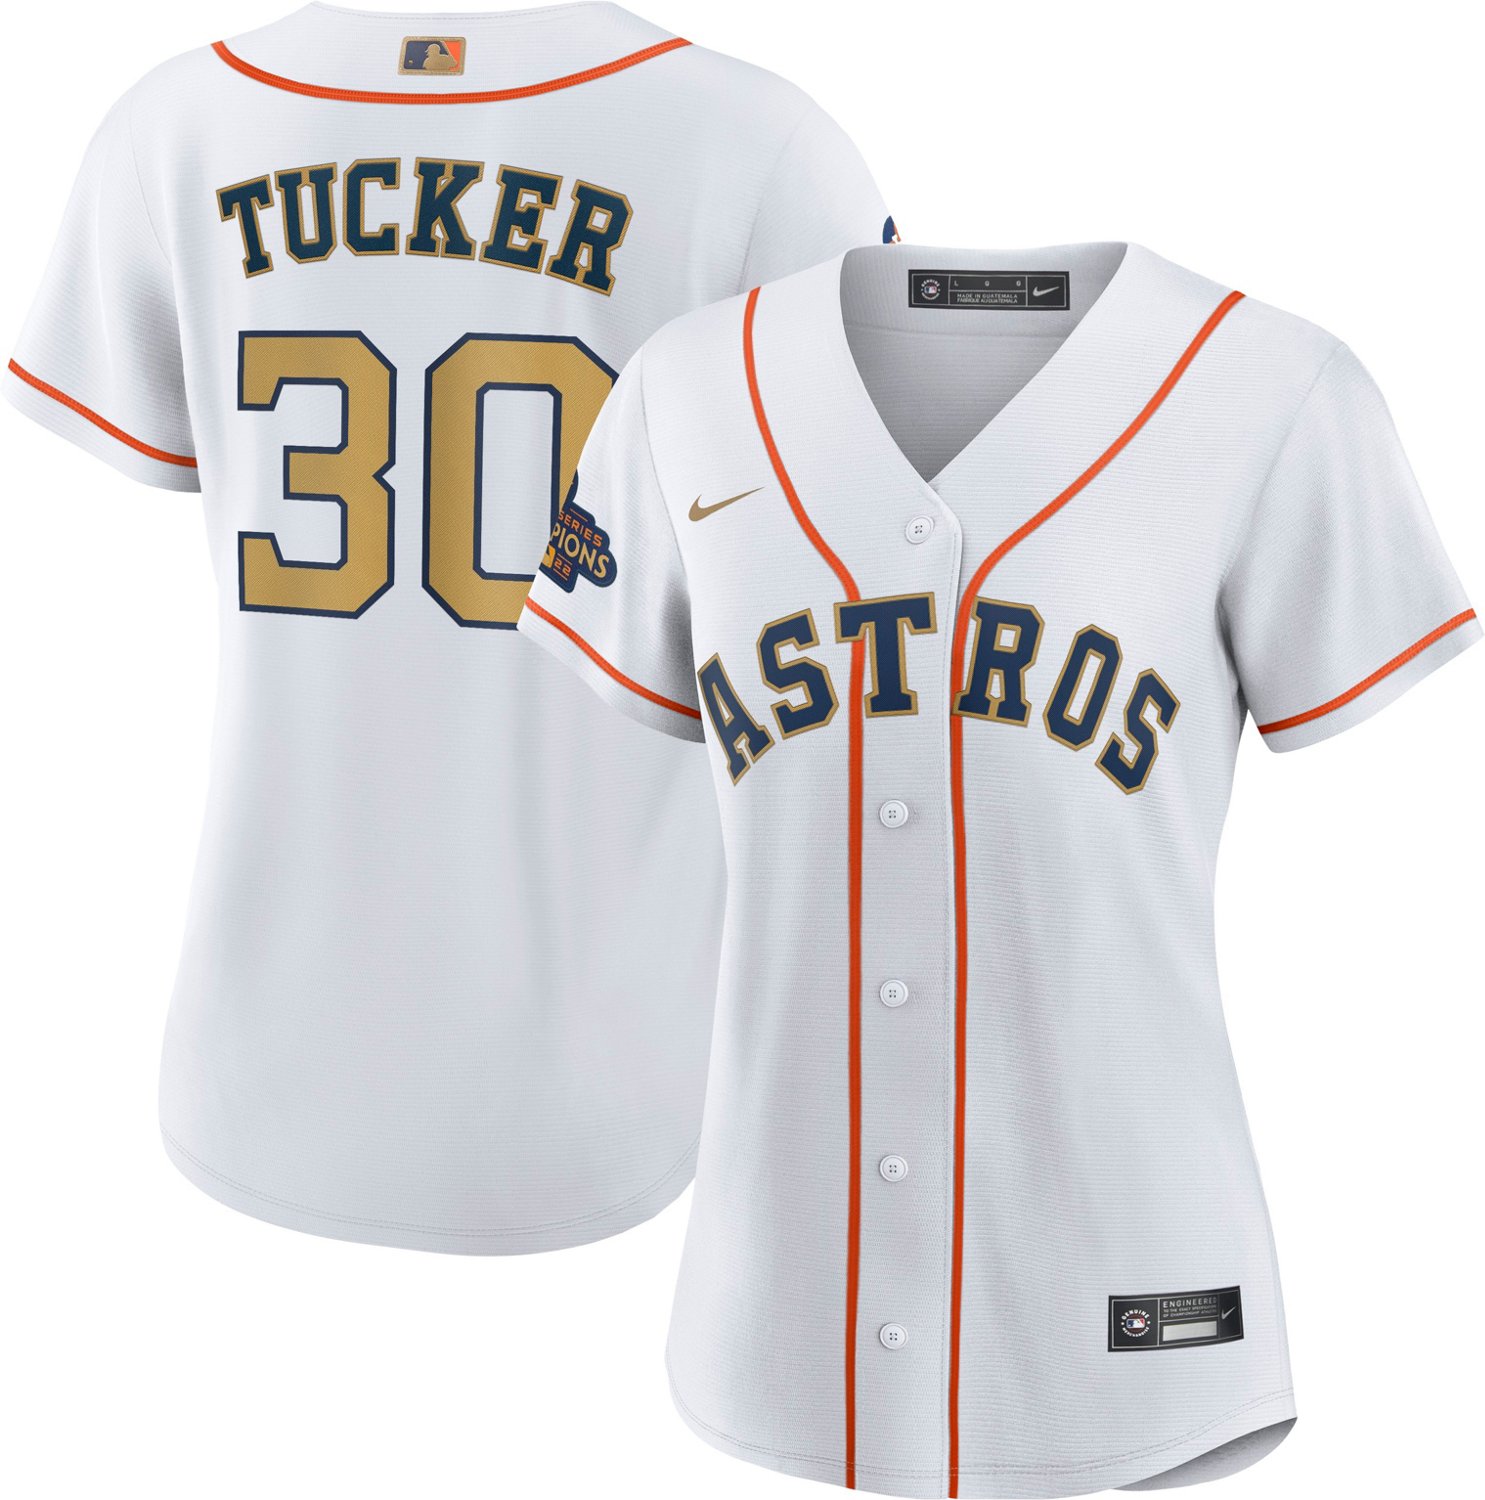 Kyle Tucker Houston Astros Home Gold Collection Jersey by NIKE